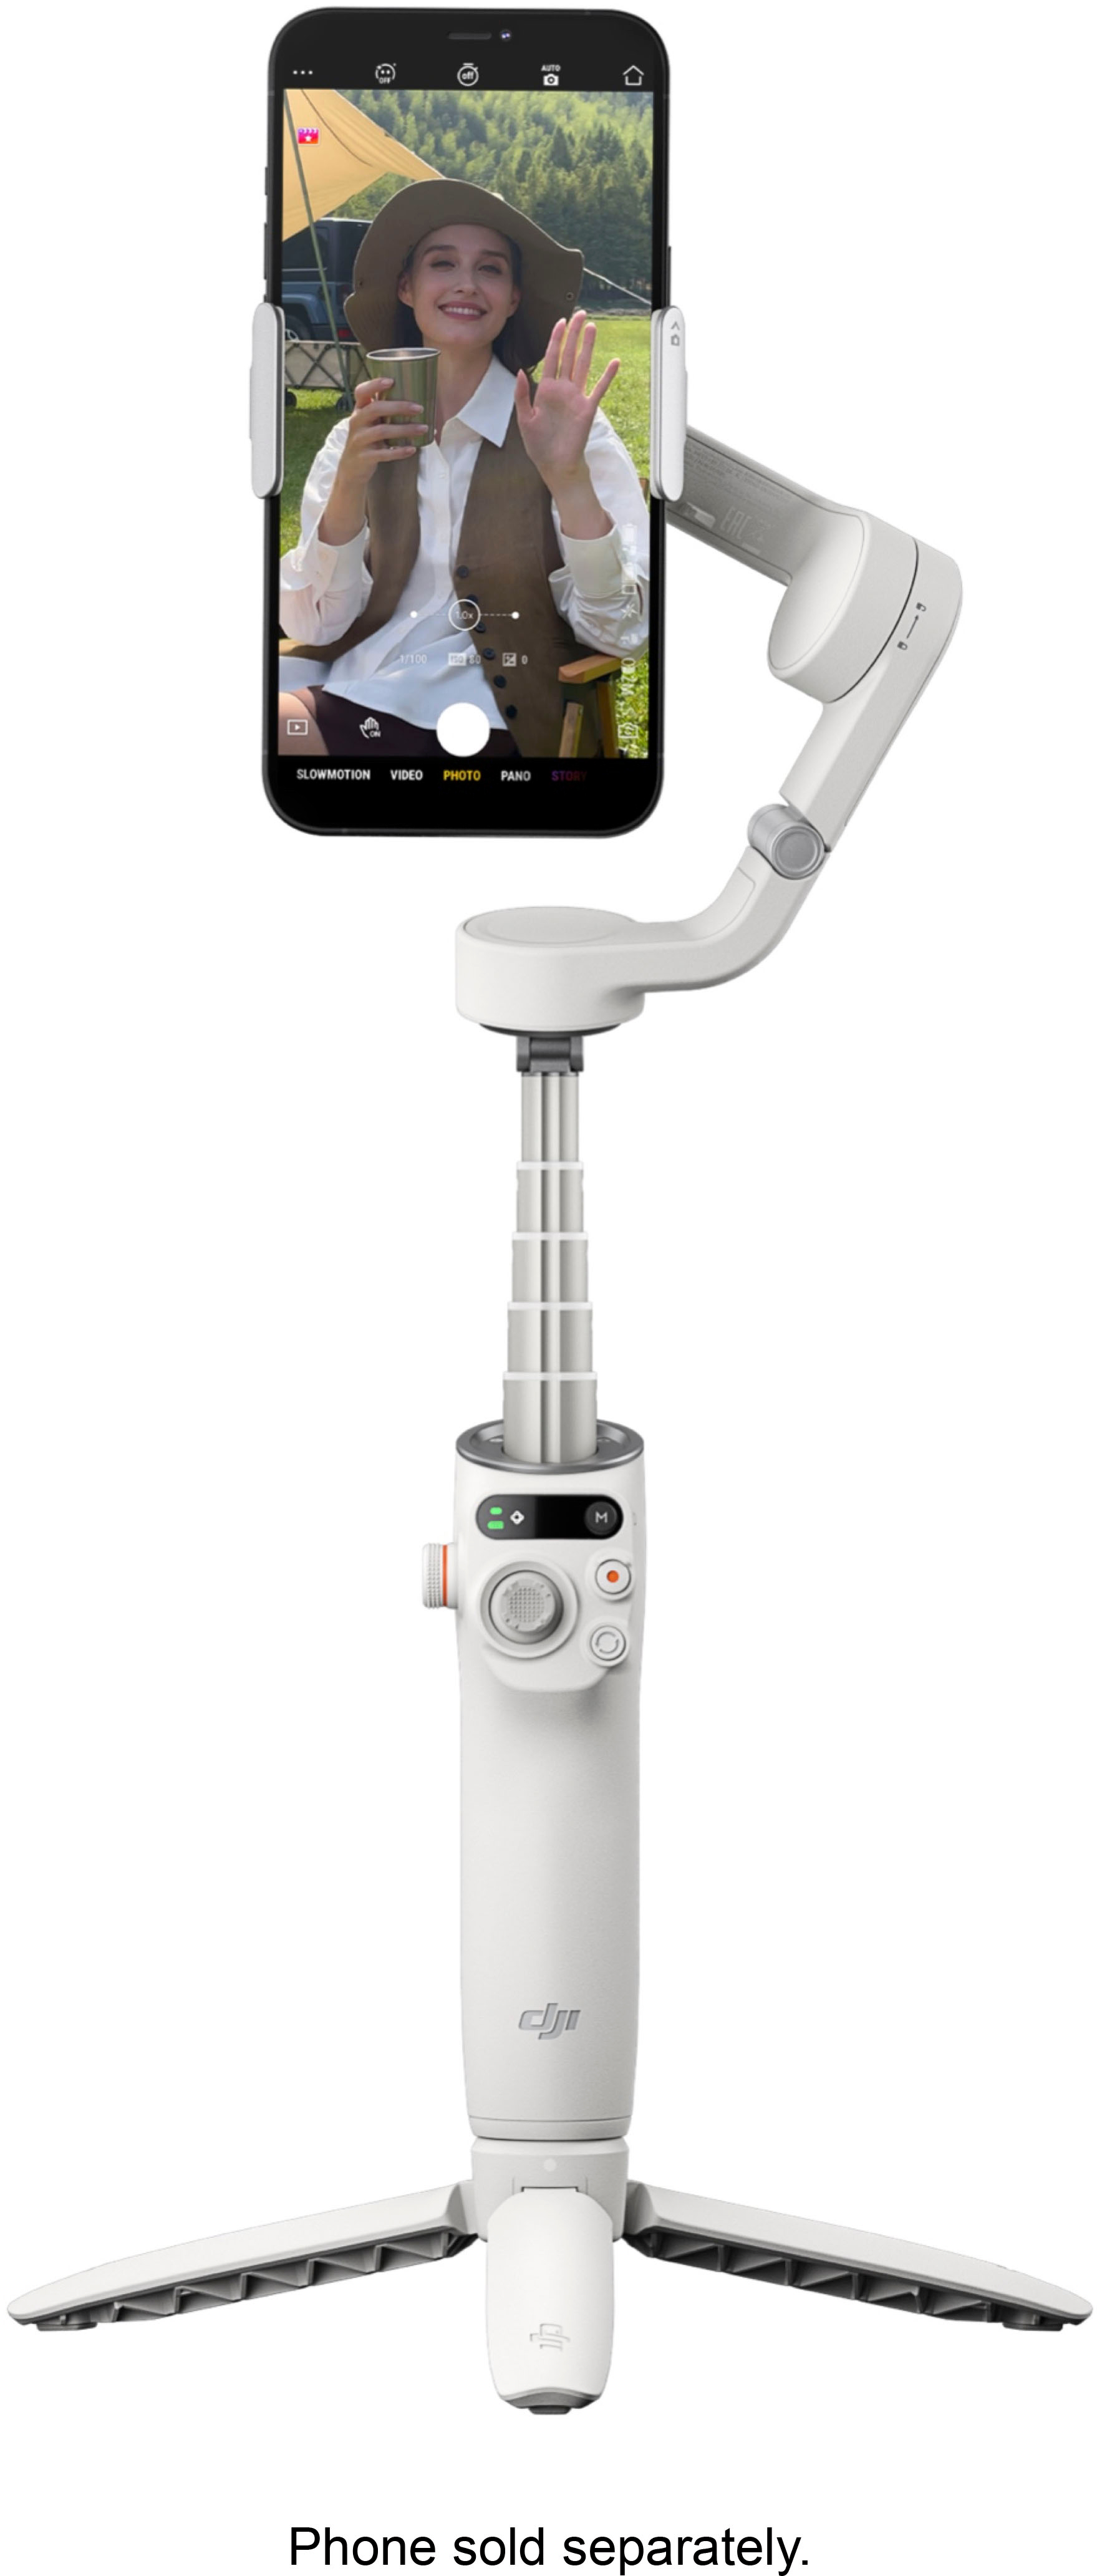 DJI Osmo Mobile 6 3-Axis Gimbal Stabilizer for Smartphones 